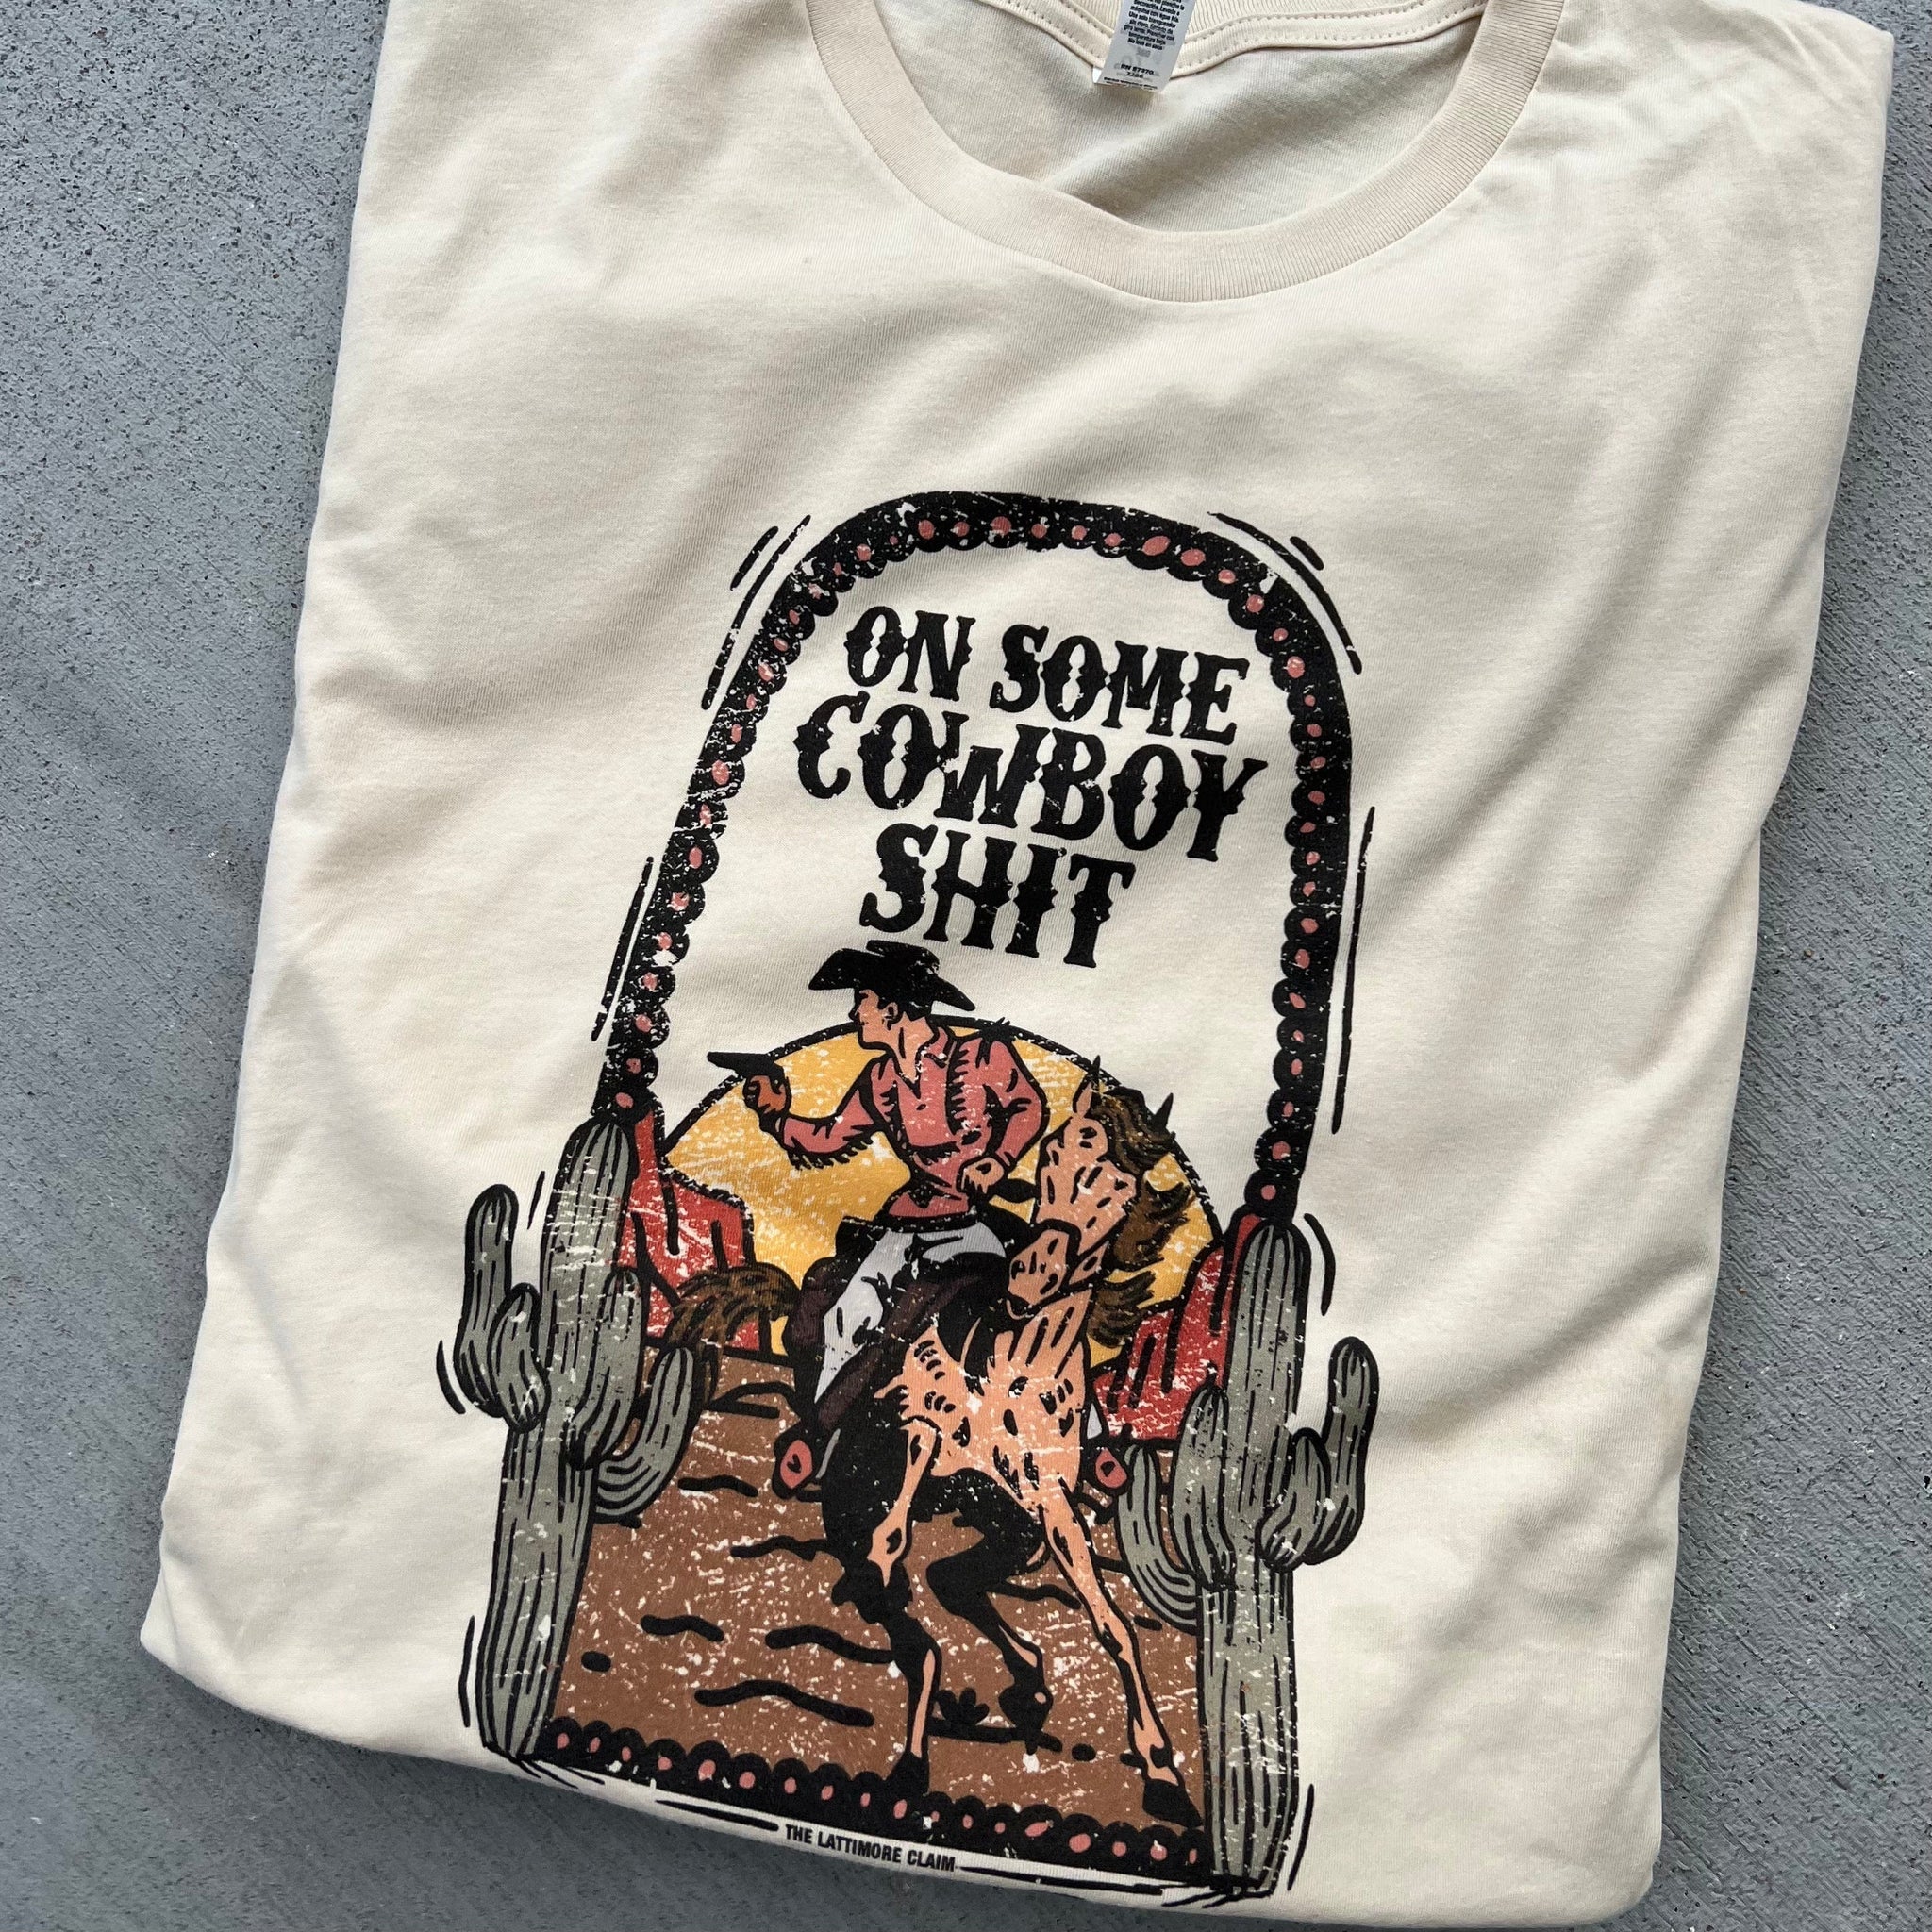 A white short sleeve crewneck tee with a graphic of a cowboy and his horse in the desert. The text "On some cowboy sh*t" is centered above the graphic. The item is pictured on a heather grey background